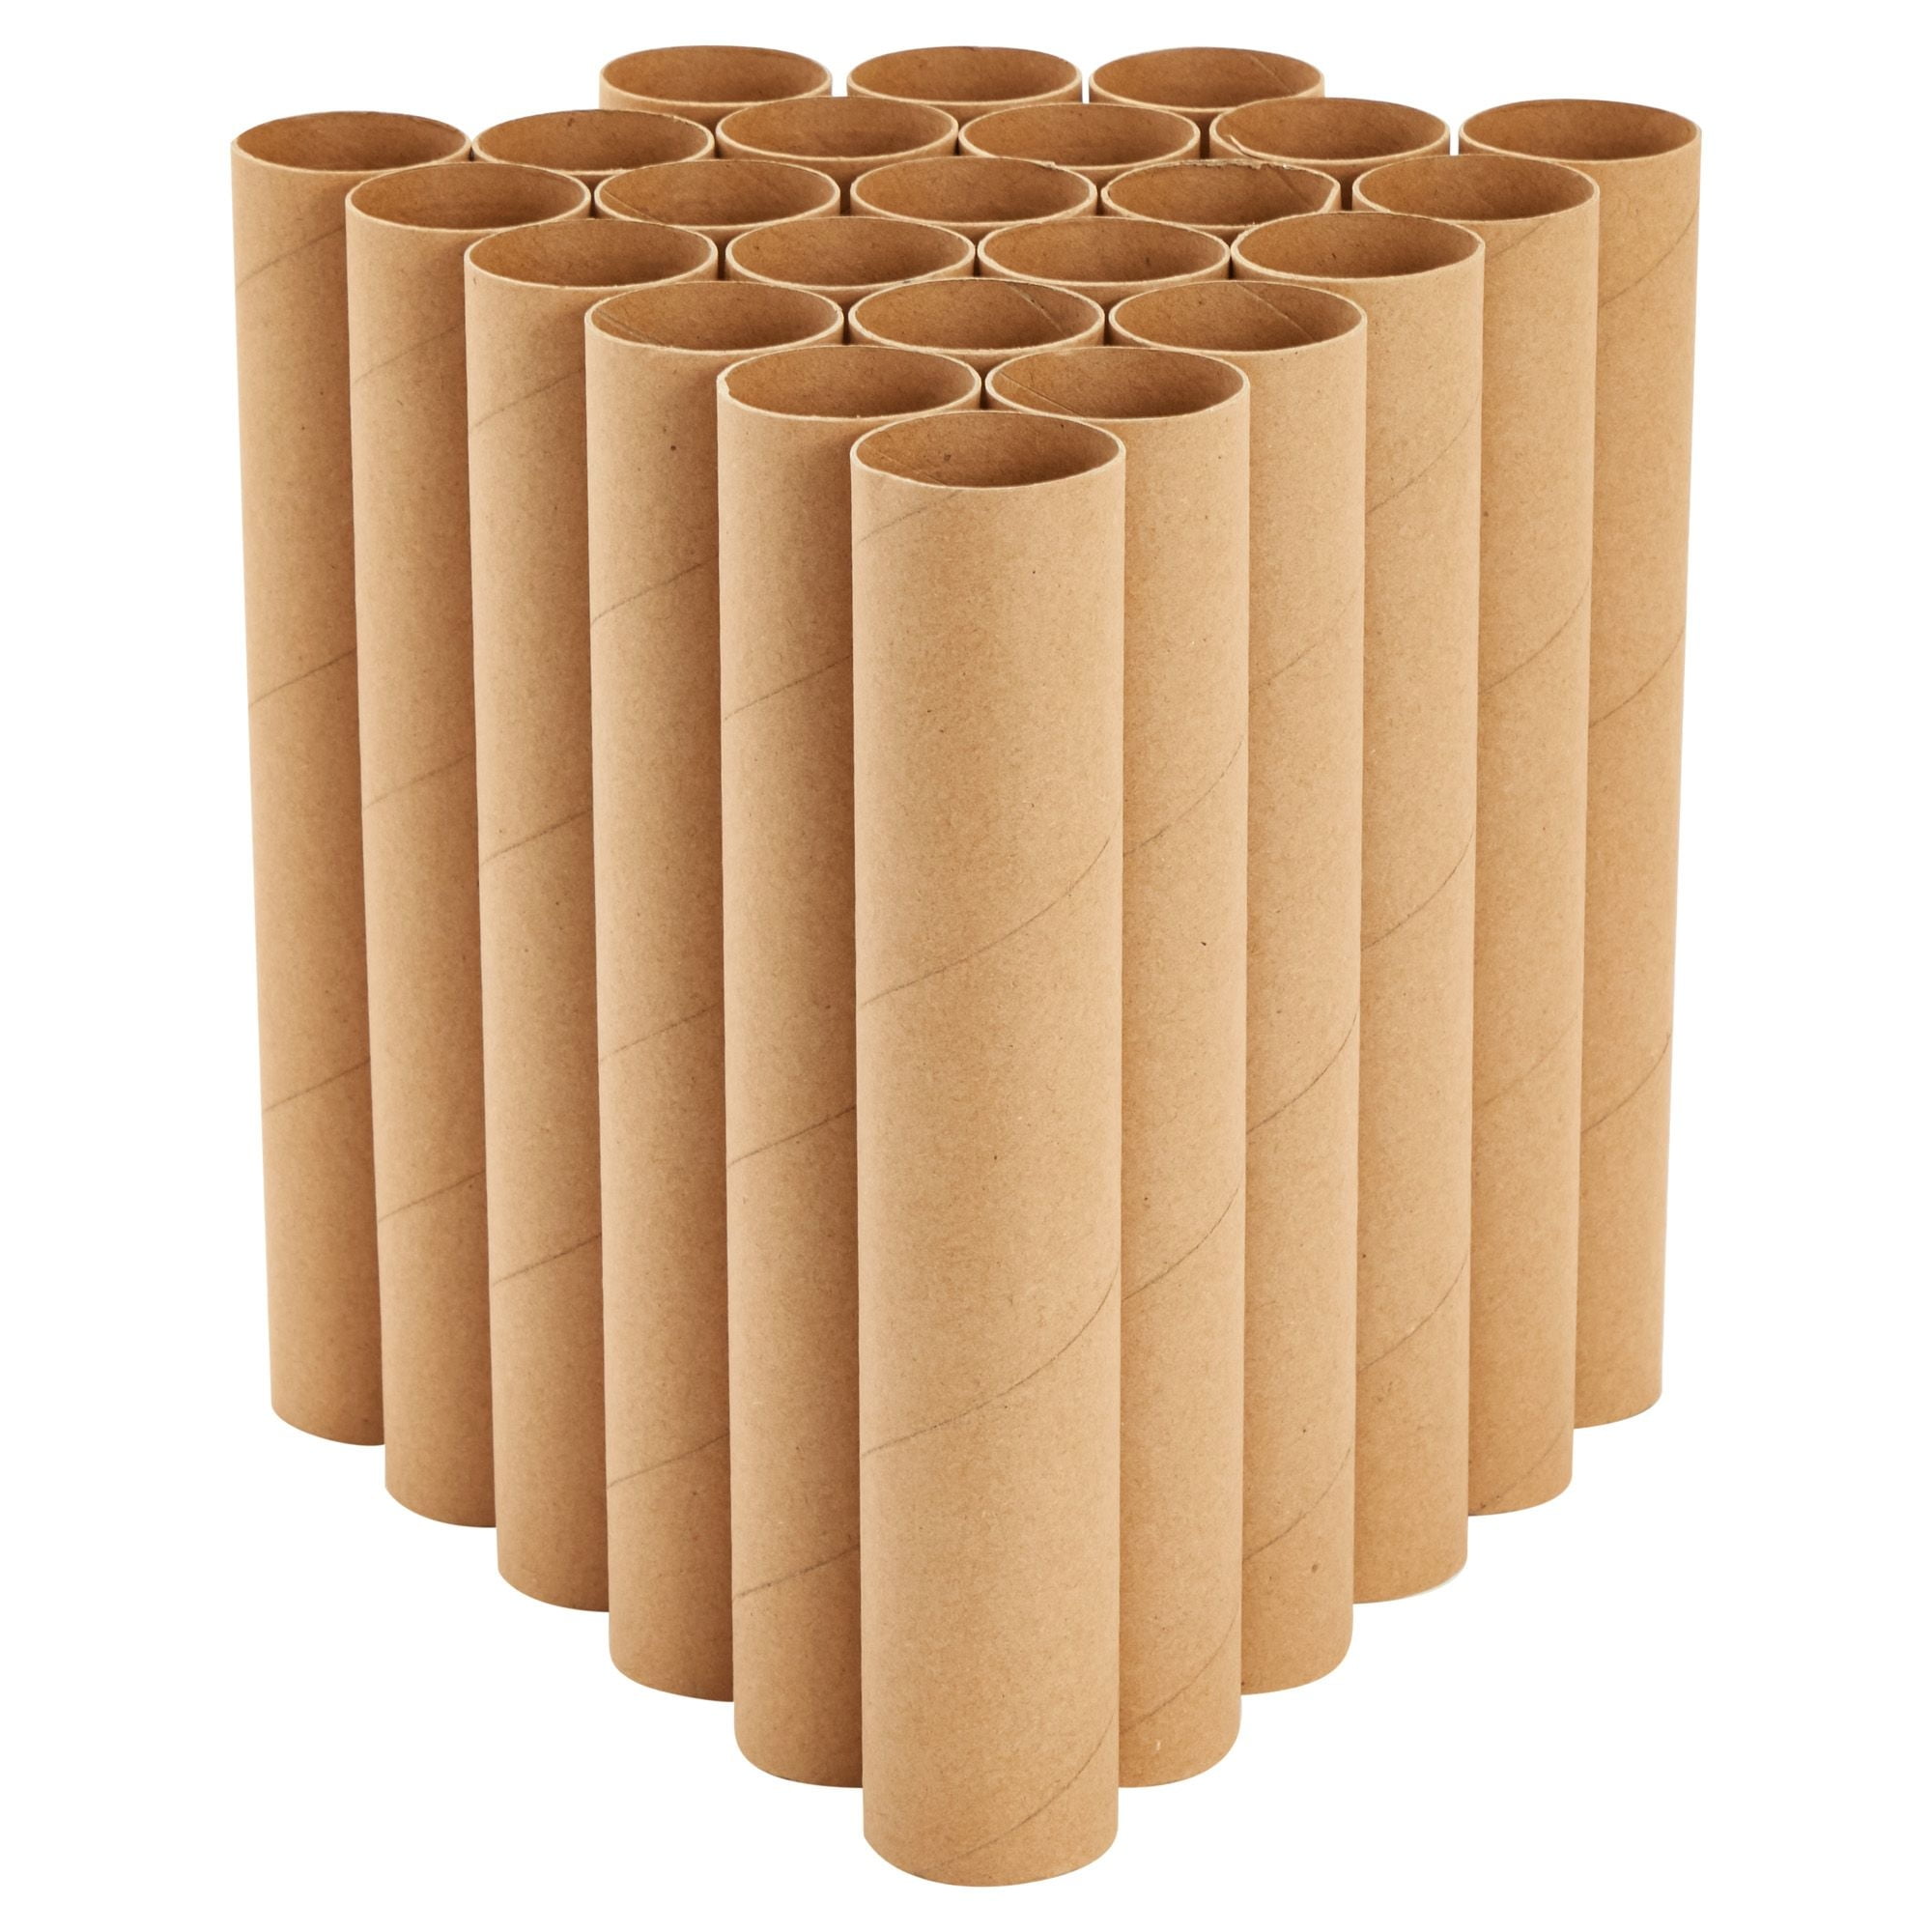 Bright Creations 36-pack Brown Cardboard Tubes For Arts And Crafts